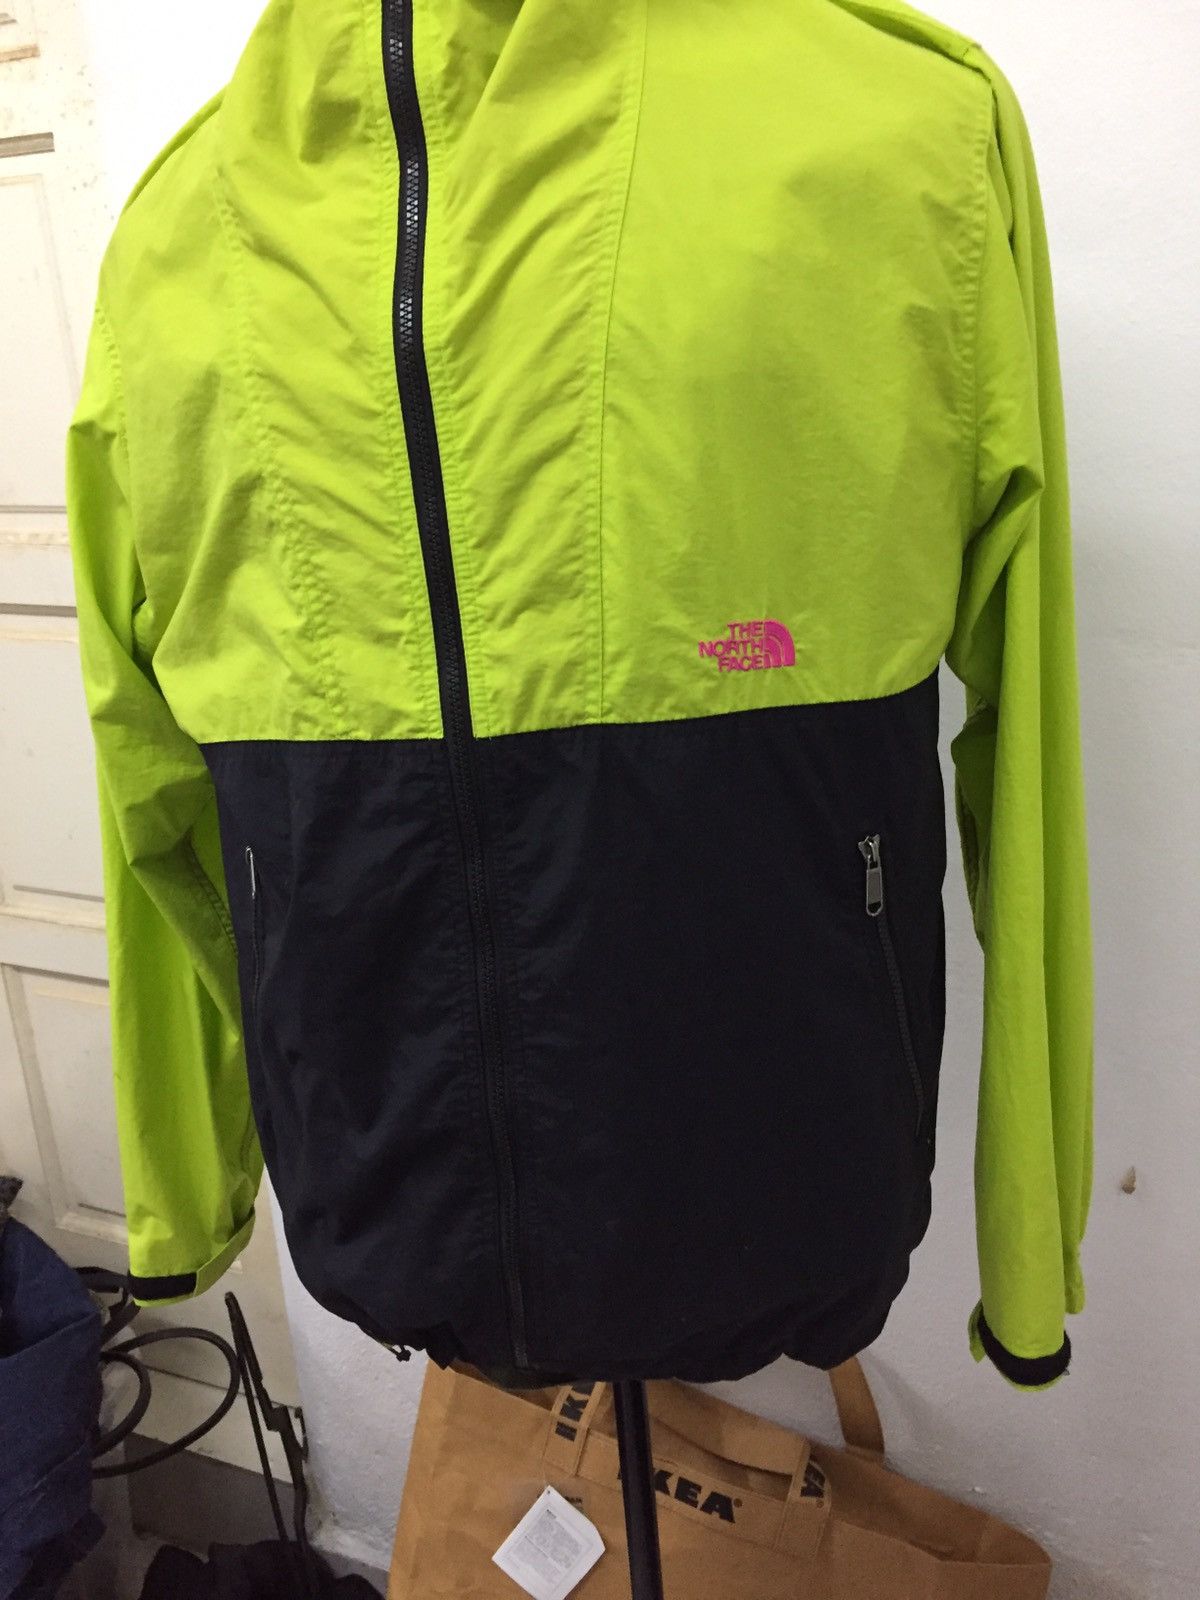 The North Face Light Jacket Neon Green/Multicolour - 18